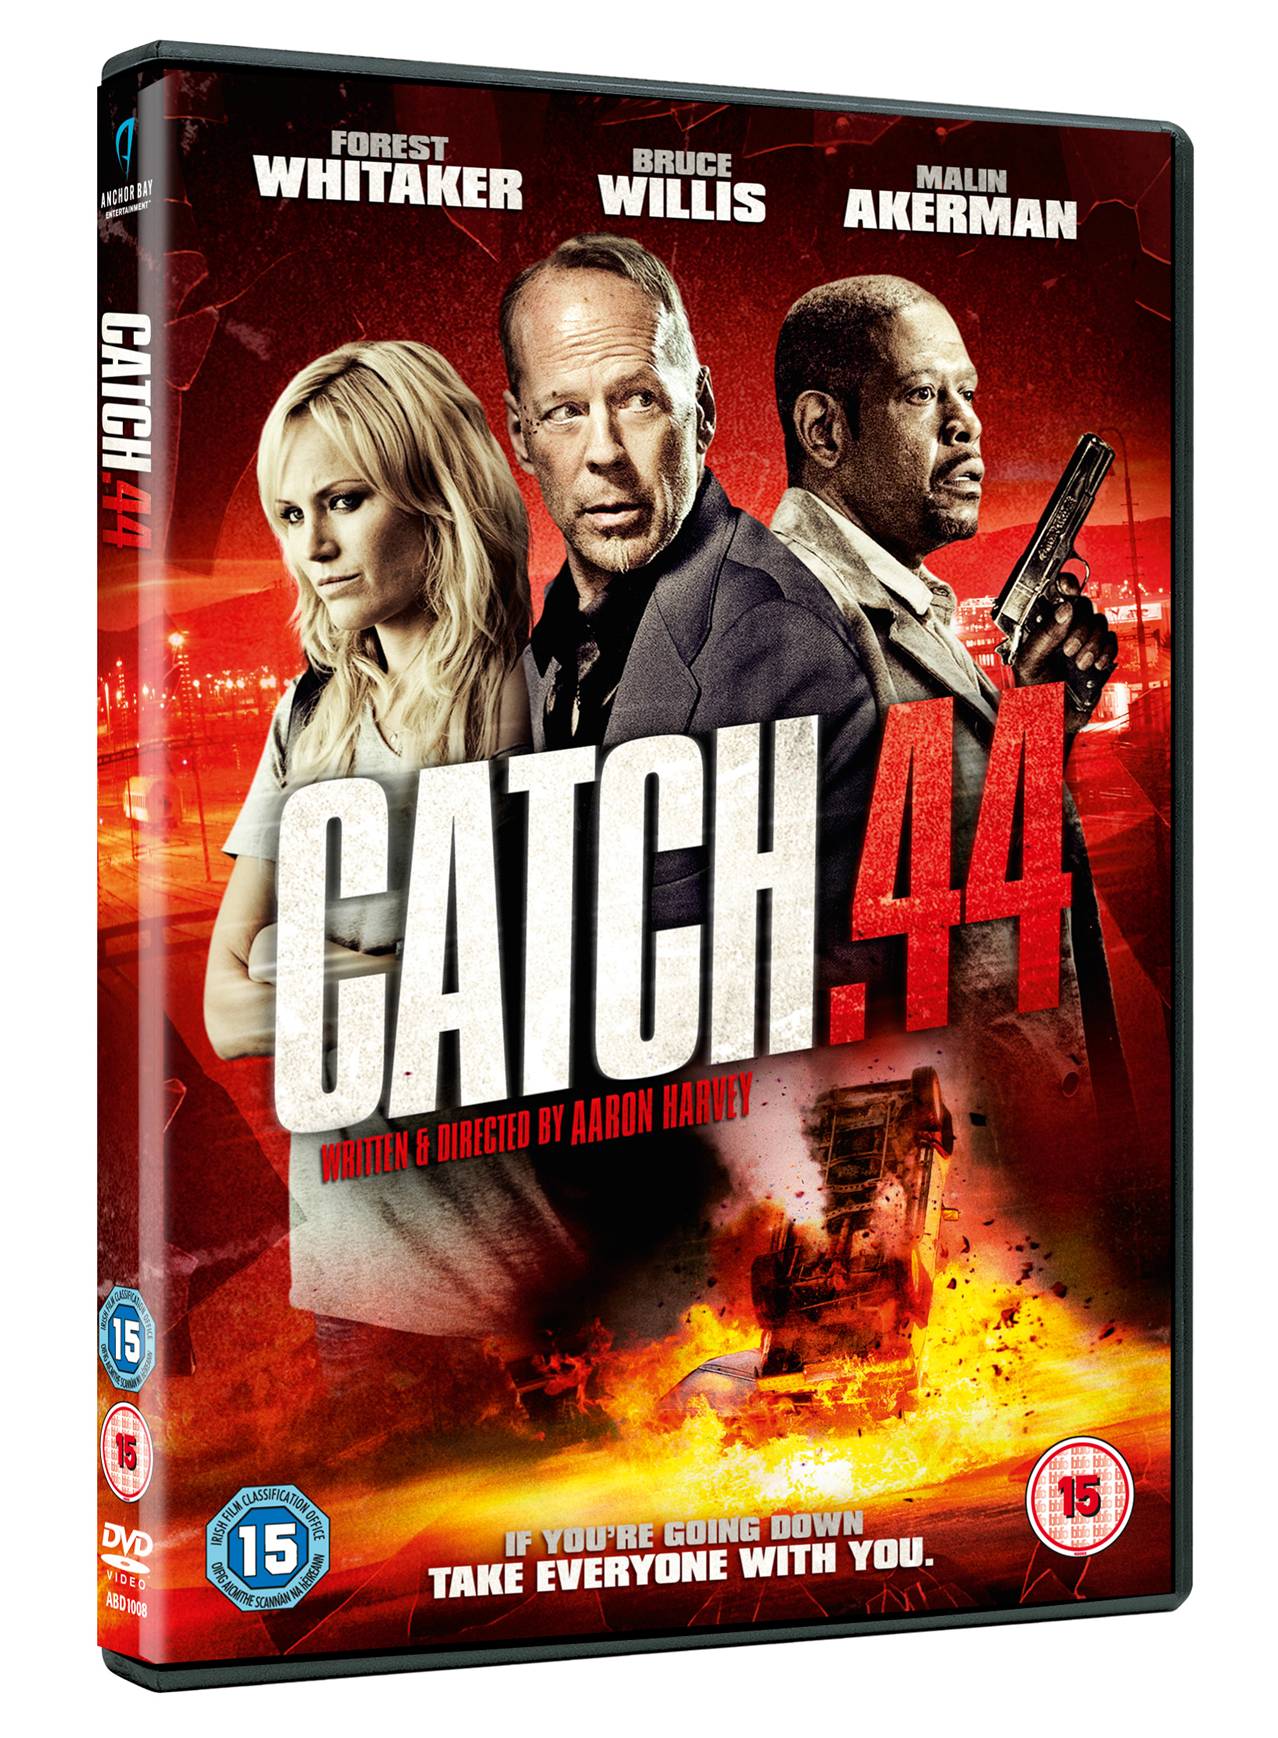 Images of Catch .44 | 1278x1738